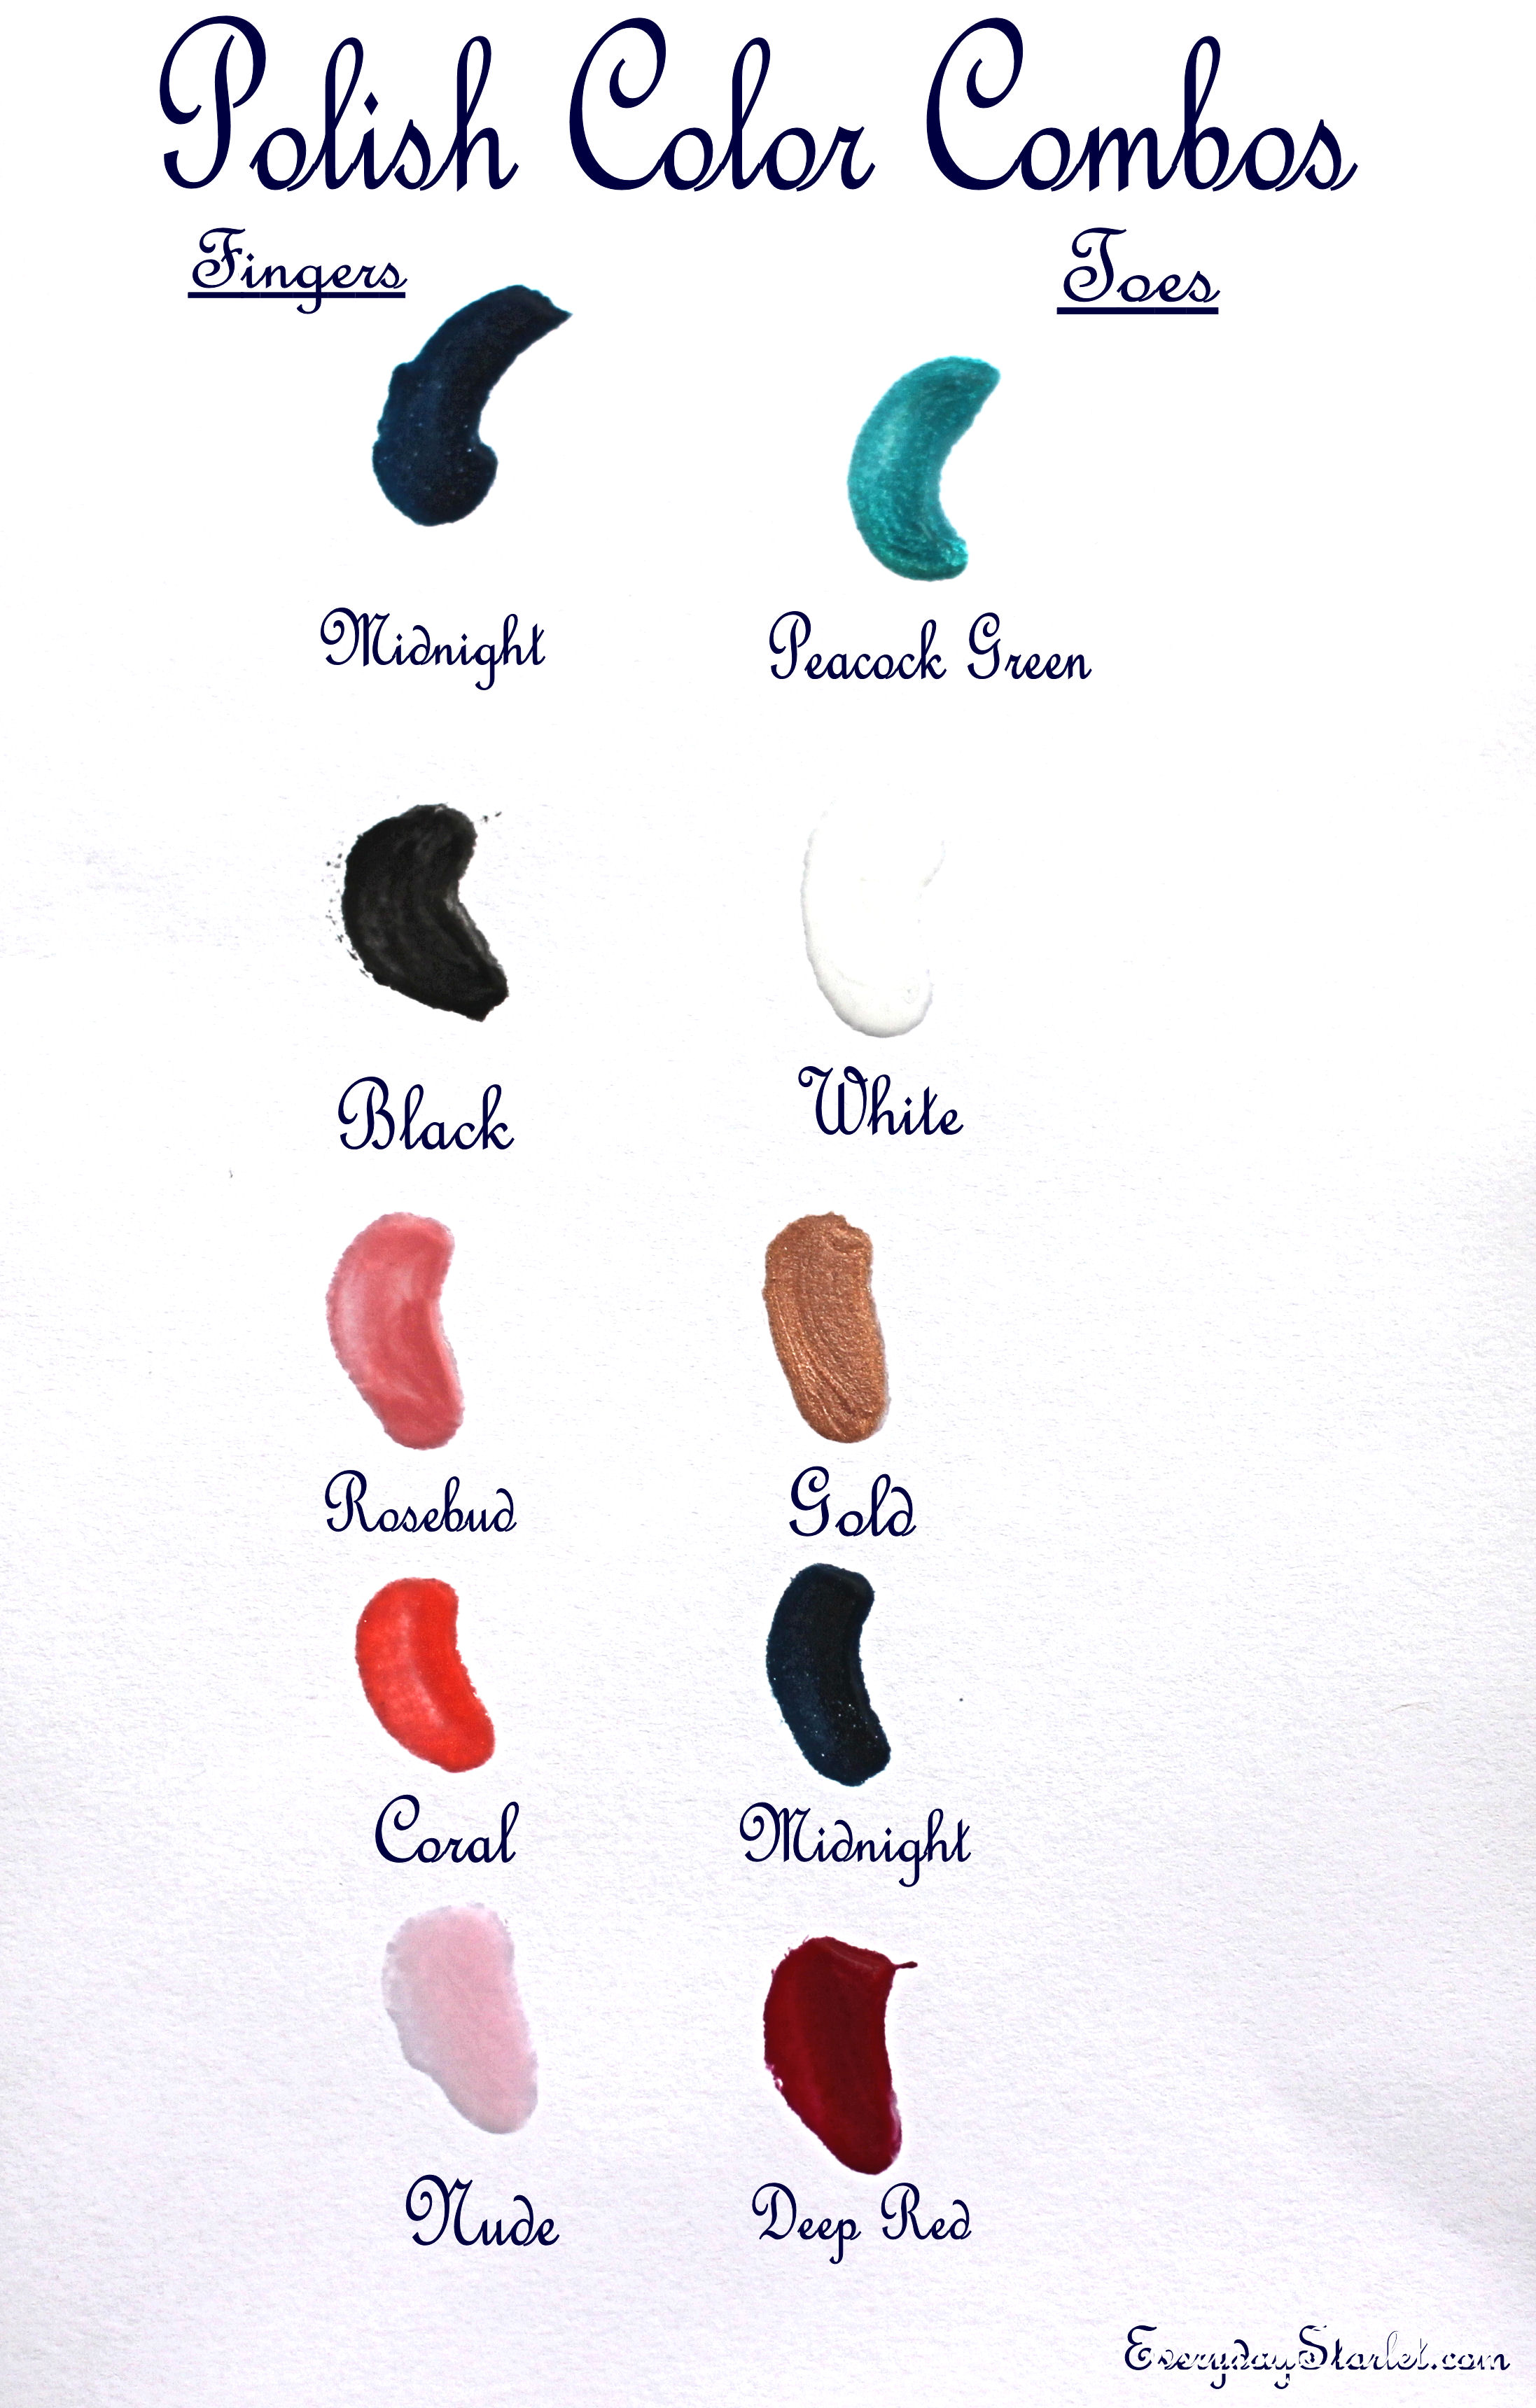 Nail Polish Color Combos for Fingers and Toes